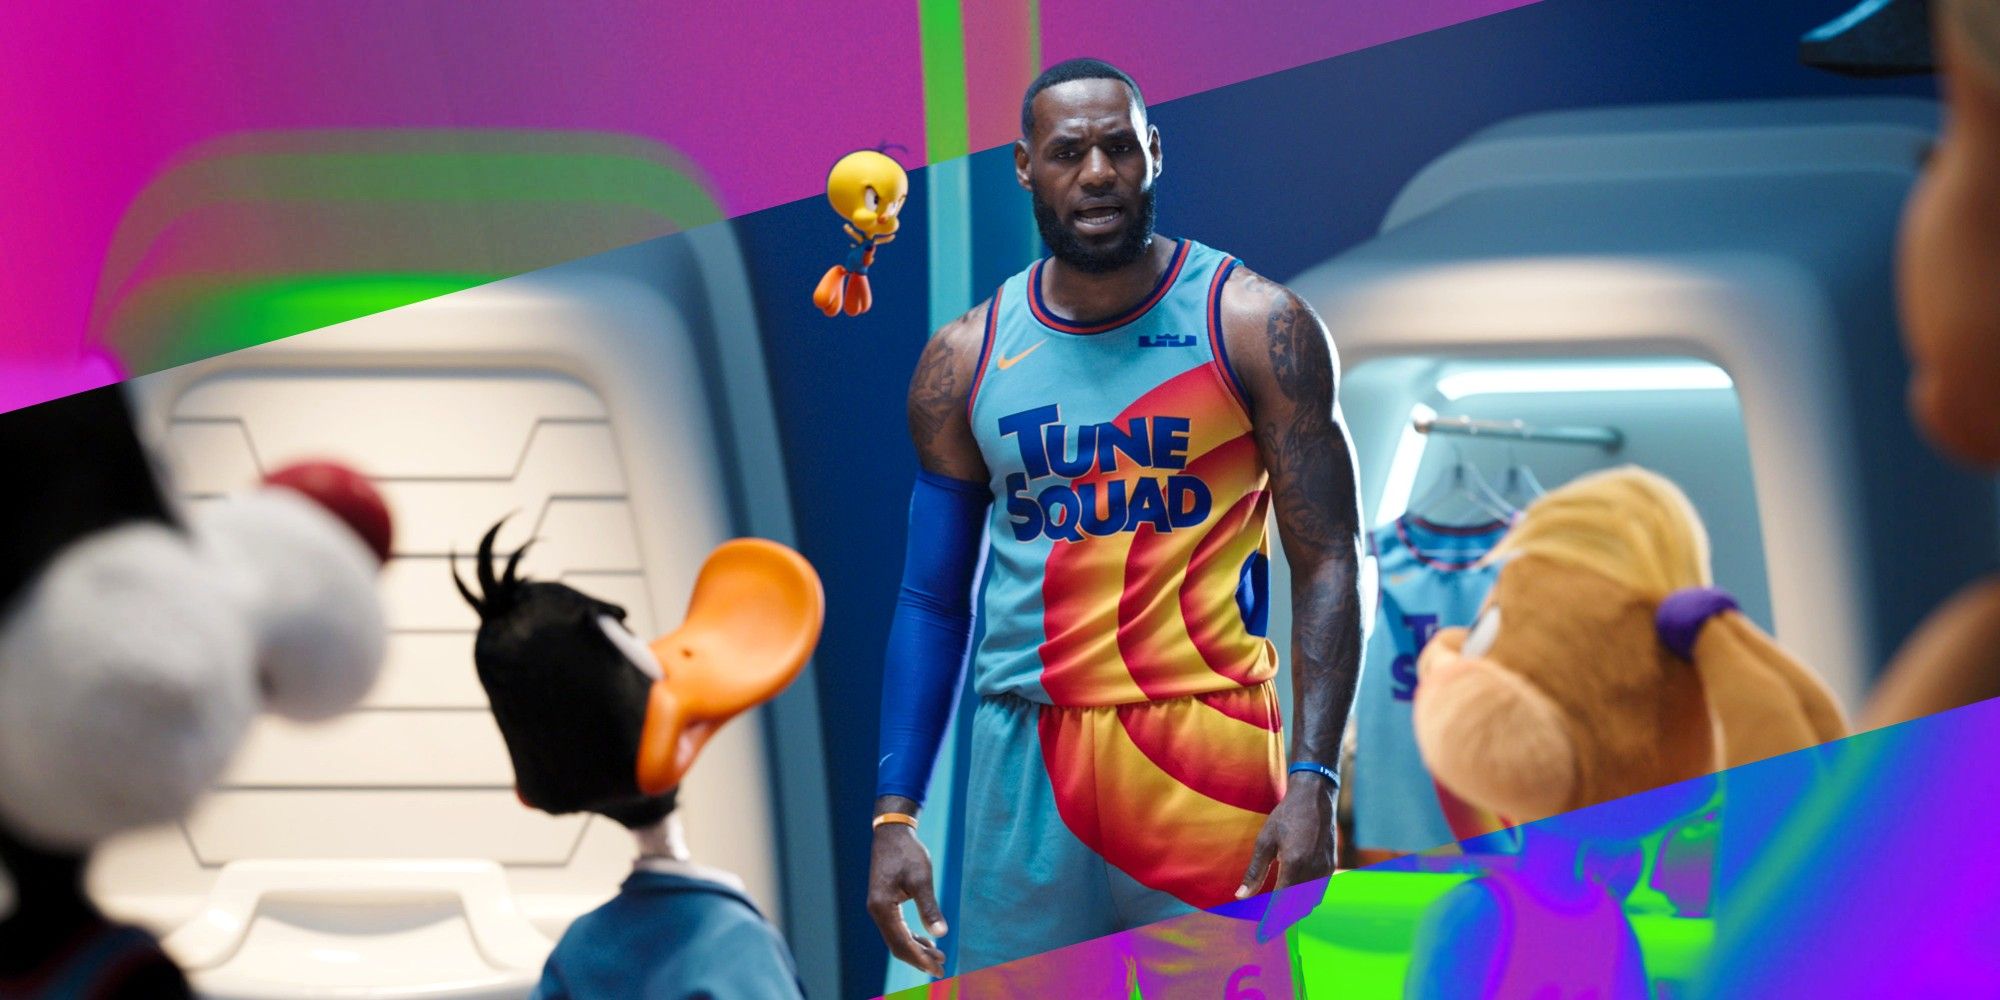 Why Space Jam: A New Legacy's Reviews Are So Bad